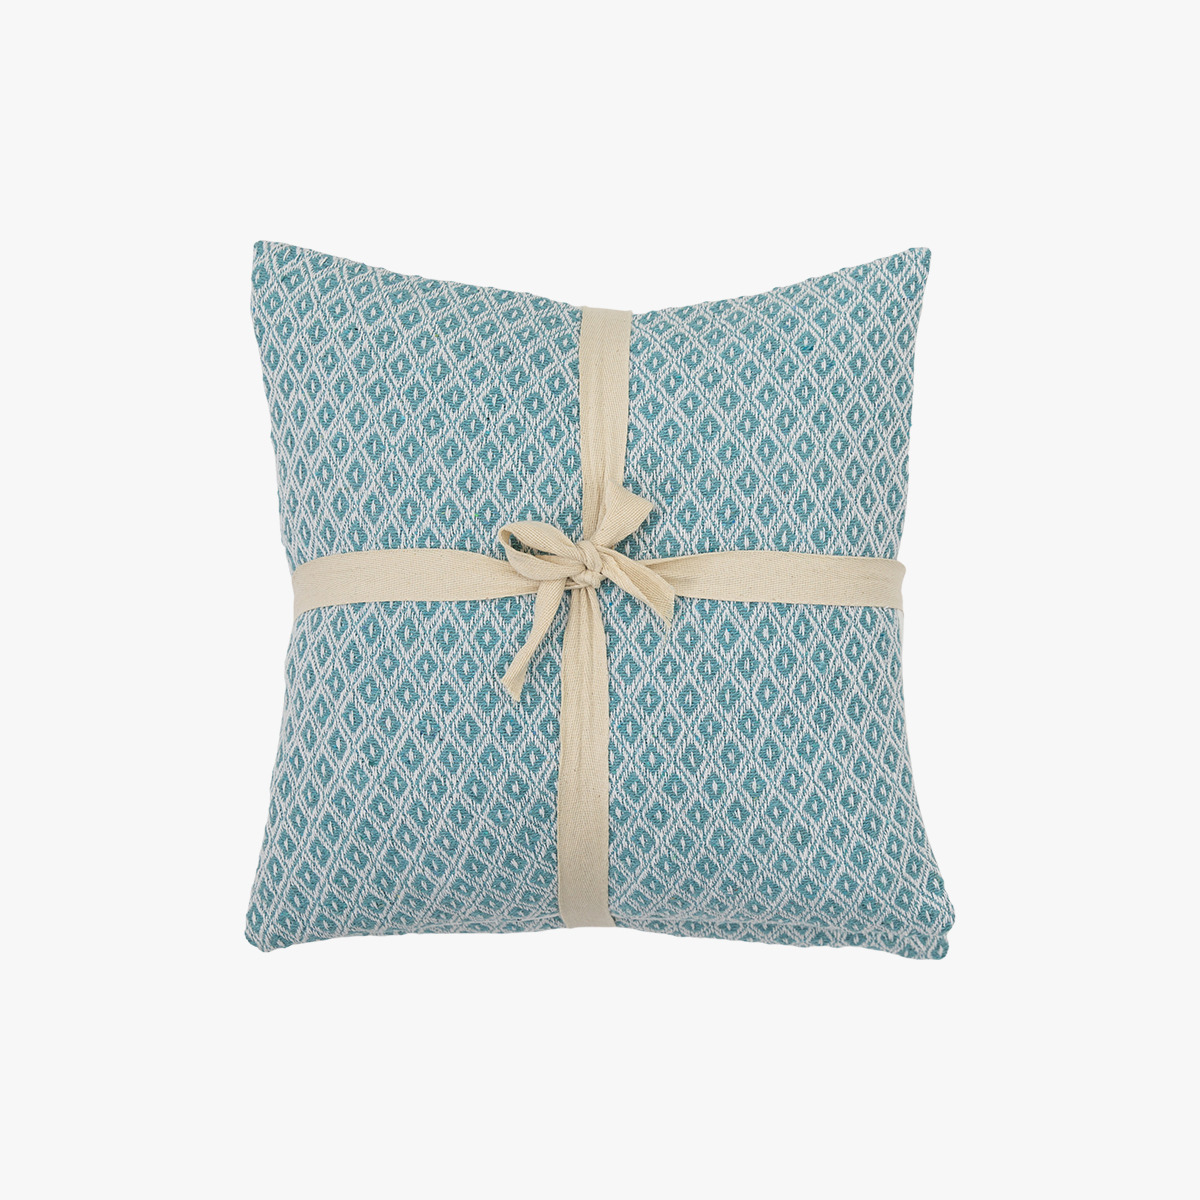 Nuzzler Geometric Cushion in Blue Set of Two